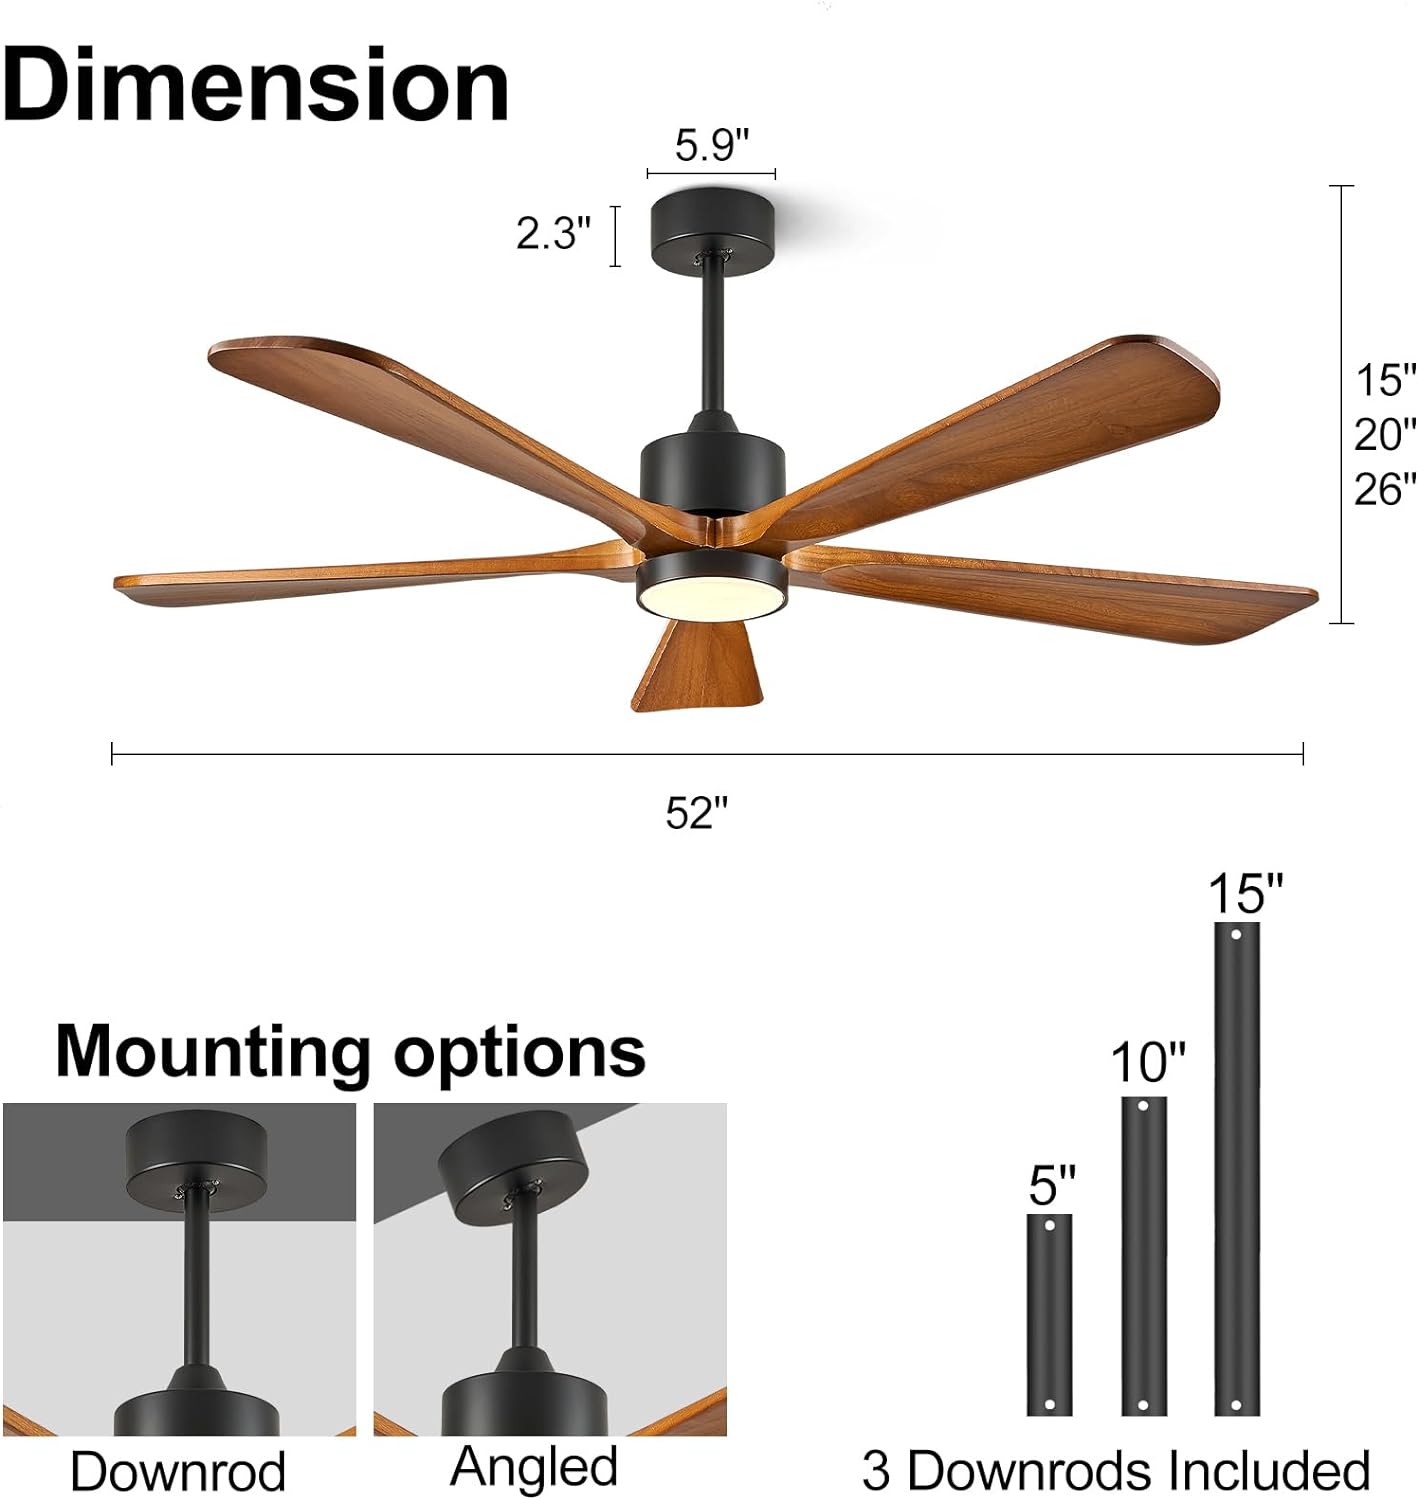 BOOSANT 52' Modern Ceiling Fan with Lights and Remote Control, 5 Solid Wood Blades 6-Speed Noiseless Reversible DC Motor, Ceiling Fan for Bedroom, Living Room-Yellow Walnut